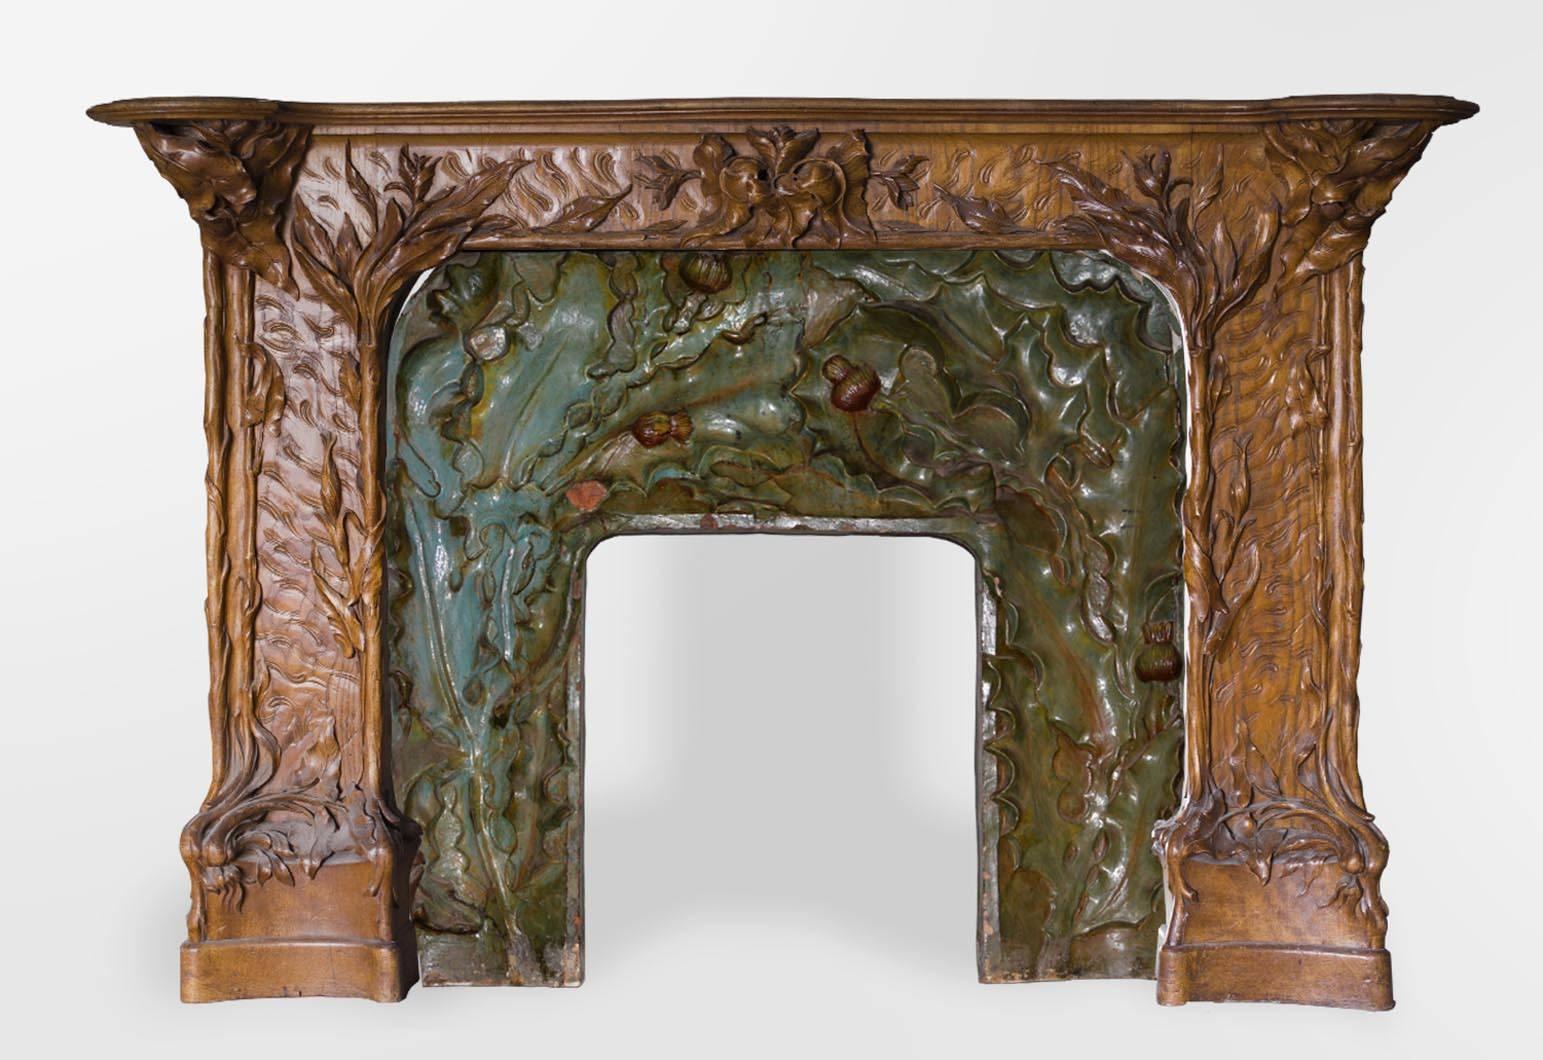 This exceptional Art Nouveau style paneled room is beautifully carved in pine and burr wood and decorated with blue-green ceramics.
The panels cover the bottom of the walls, and harmonize the whole consisting of a fireplace and its monumental